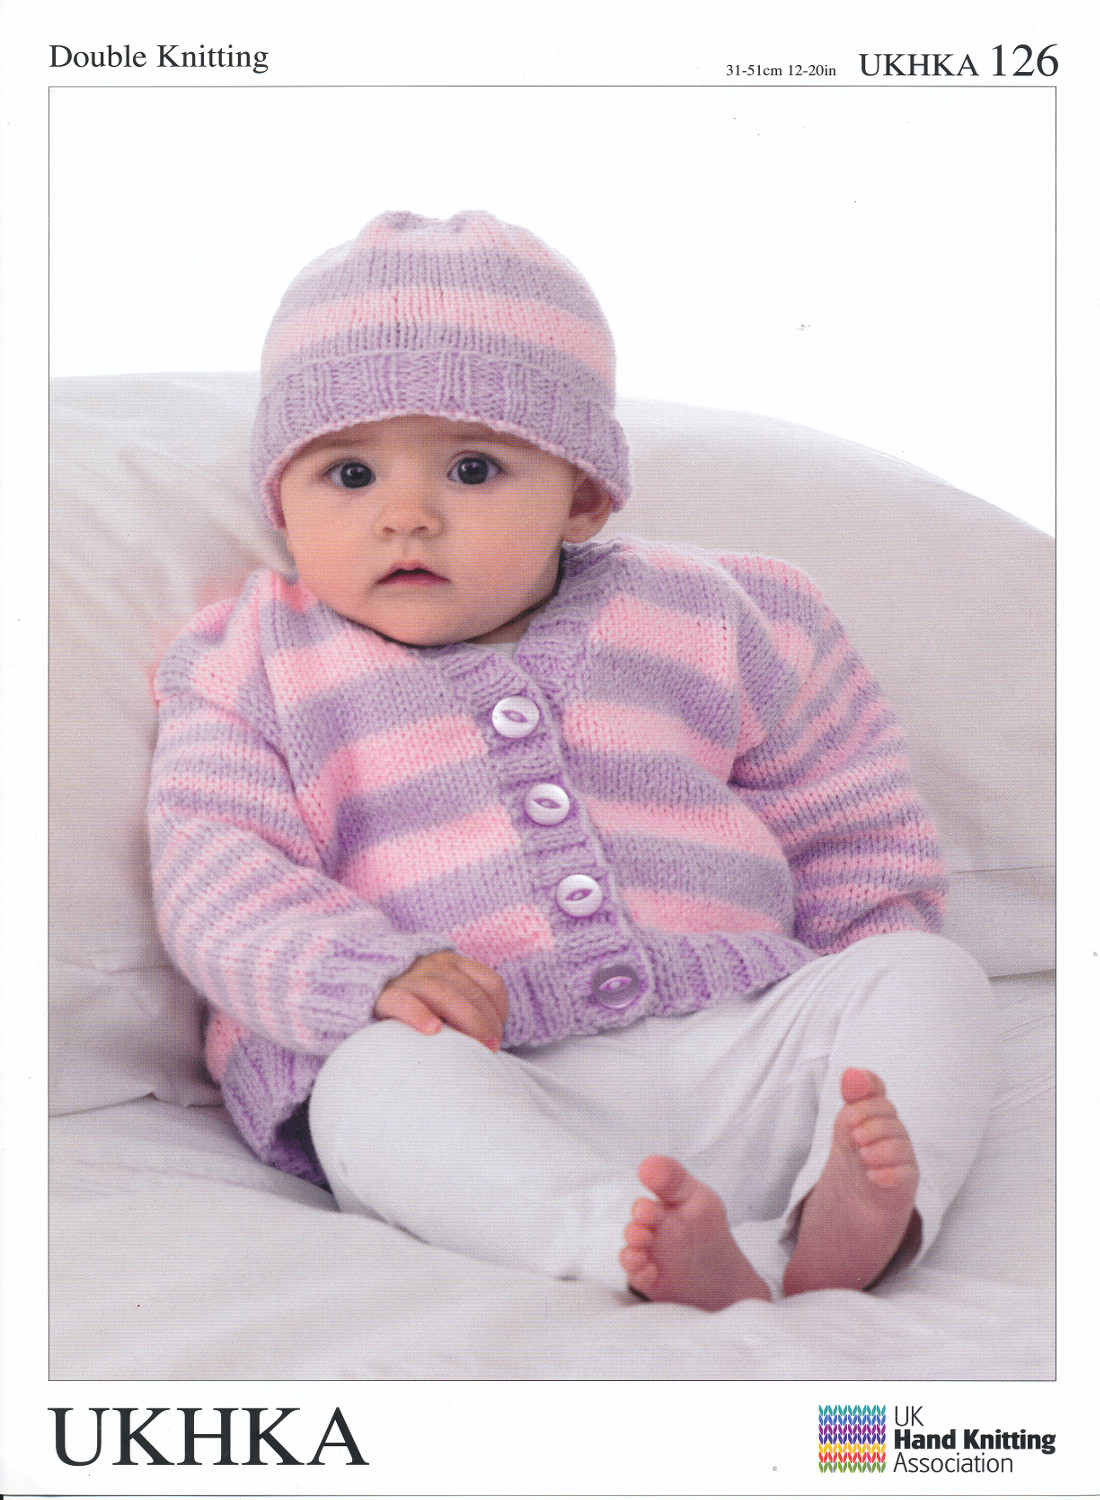 Free Knitting Patterns For Hats Uk Details About Double Knitting Dk Pattern Ba Long Sleeved Striped Cardigan Hat Ukhka 126